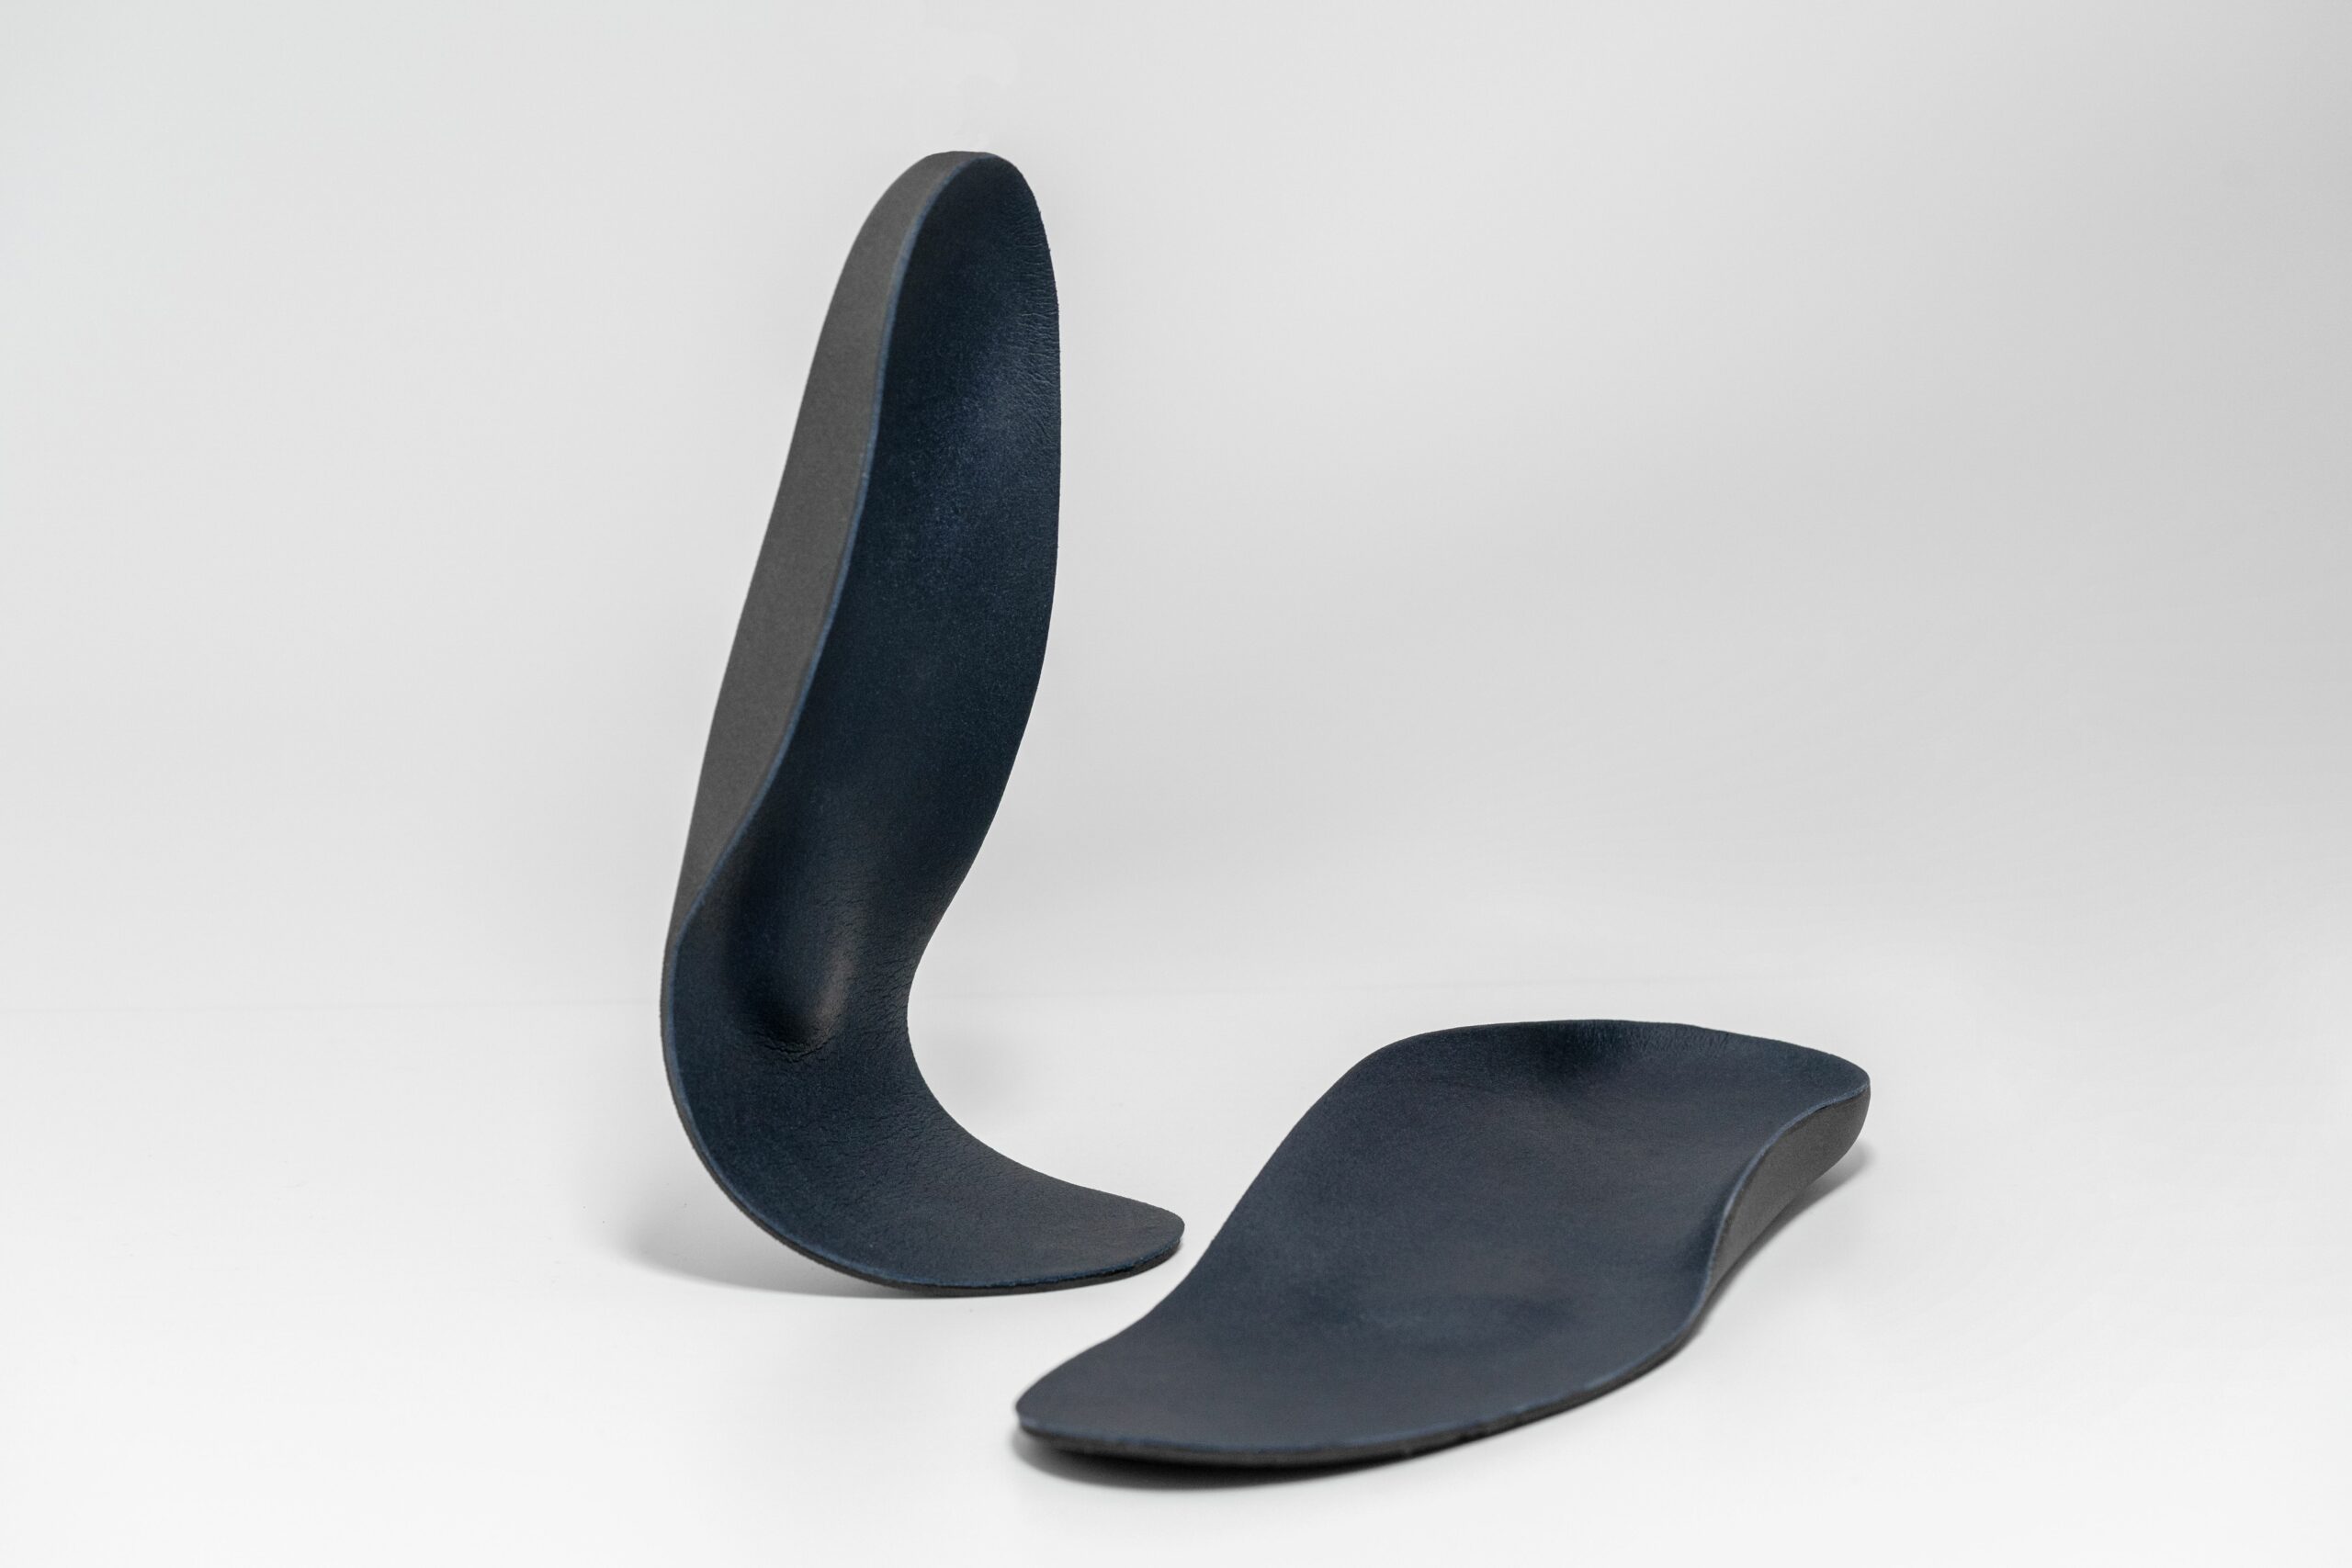 pair of insoles with one bending to show flexibility of material